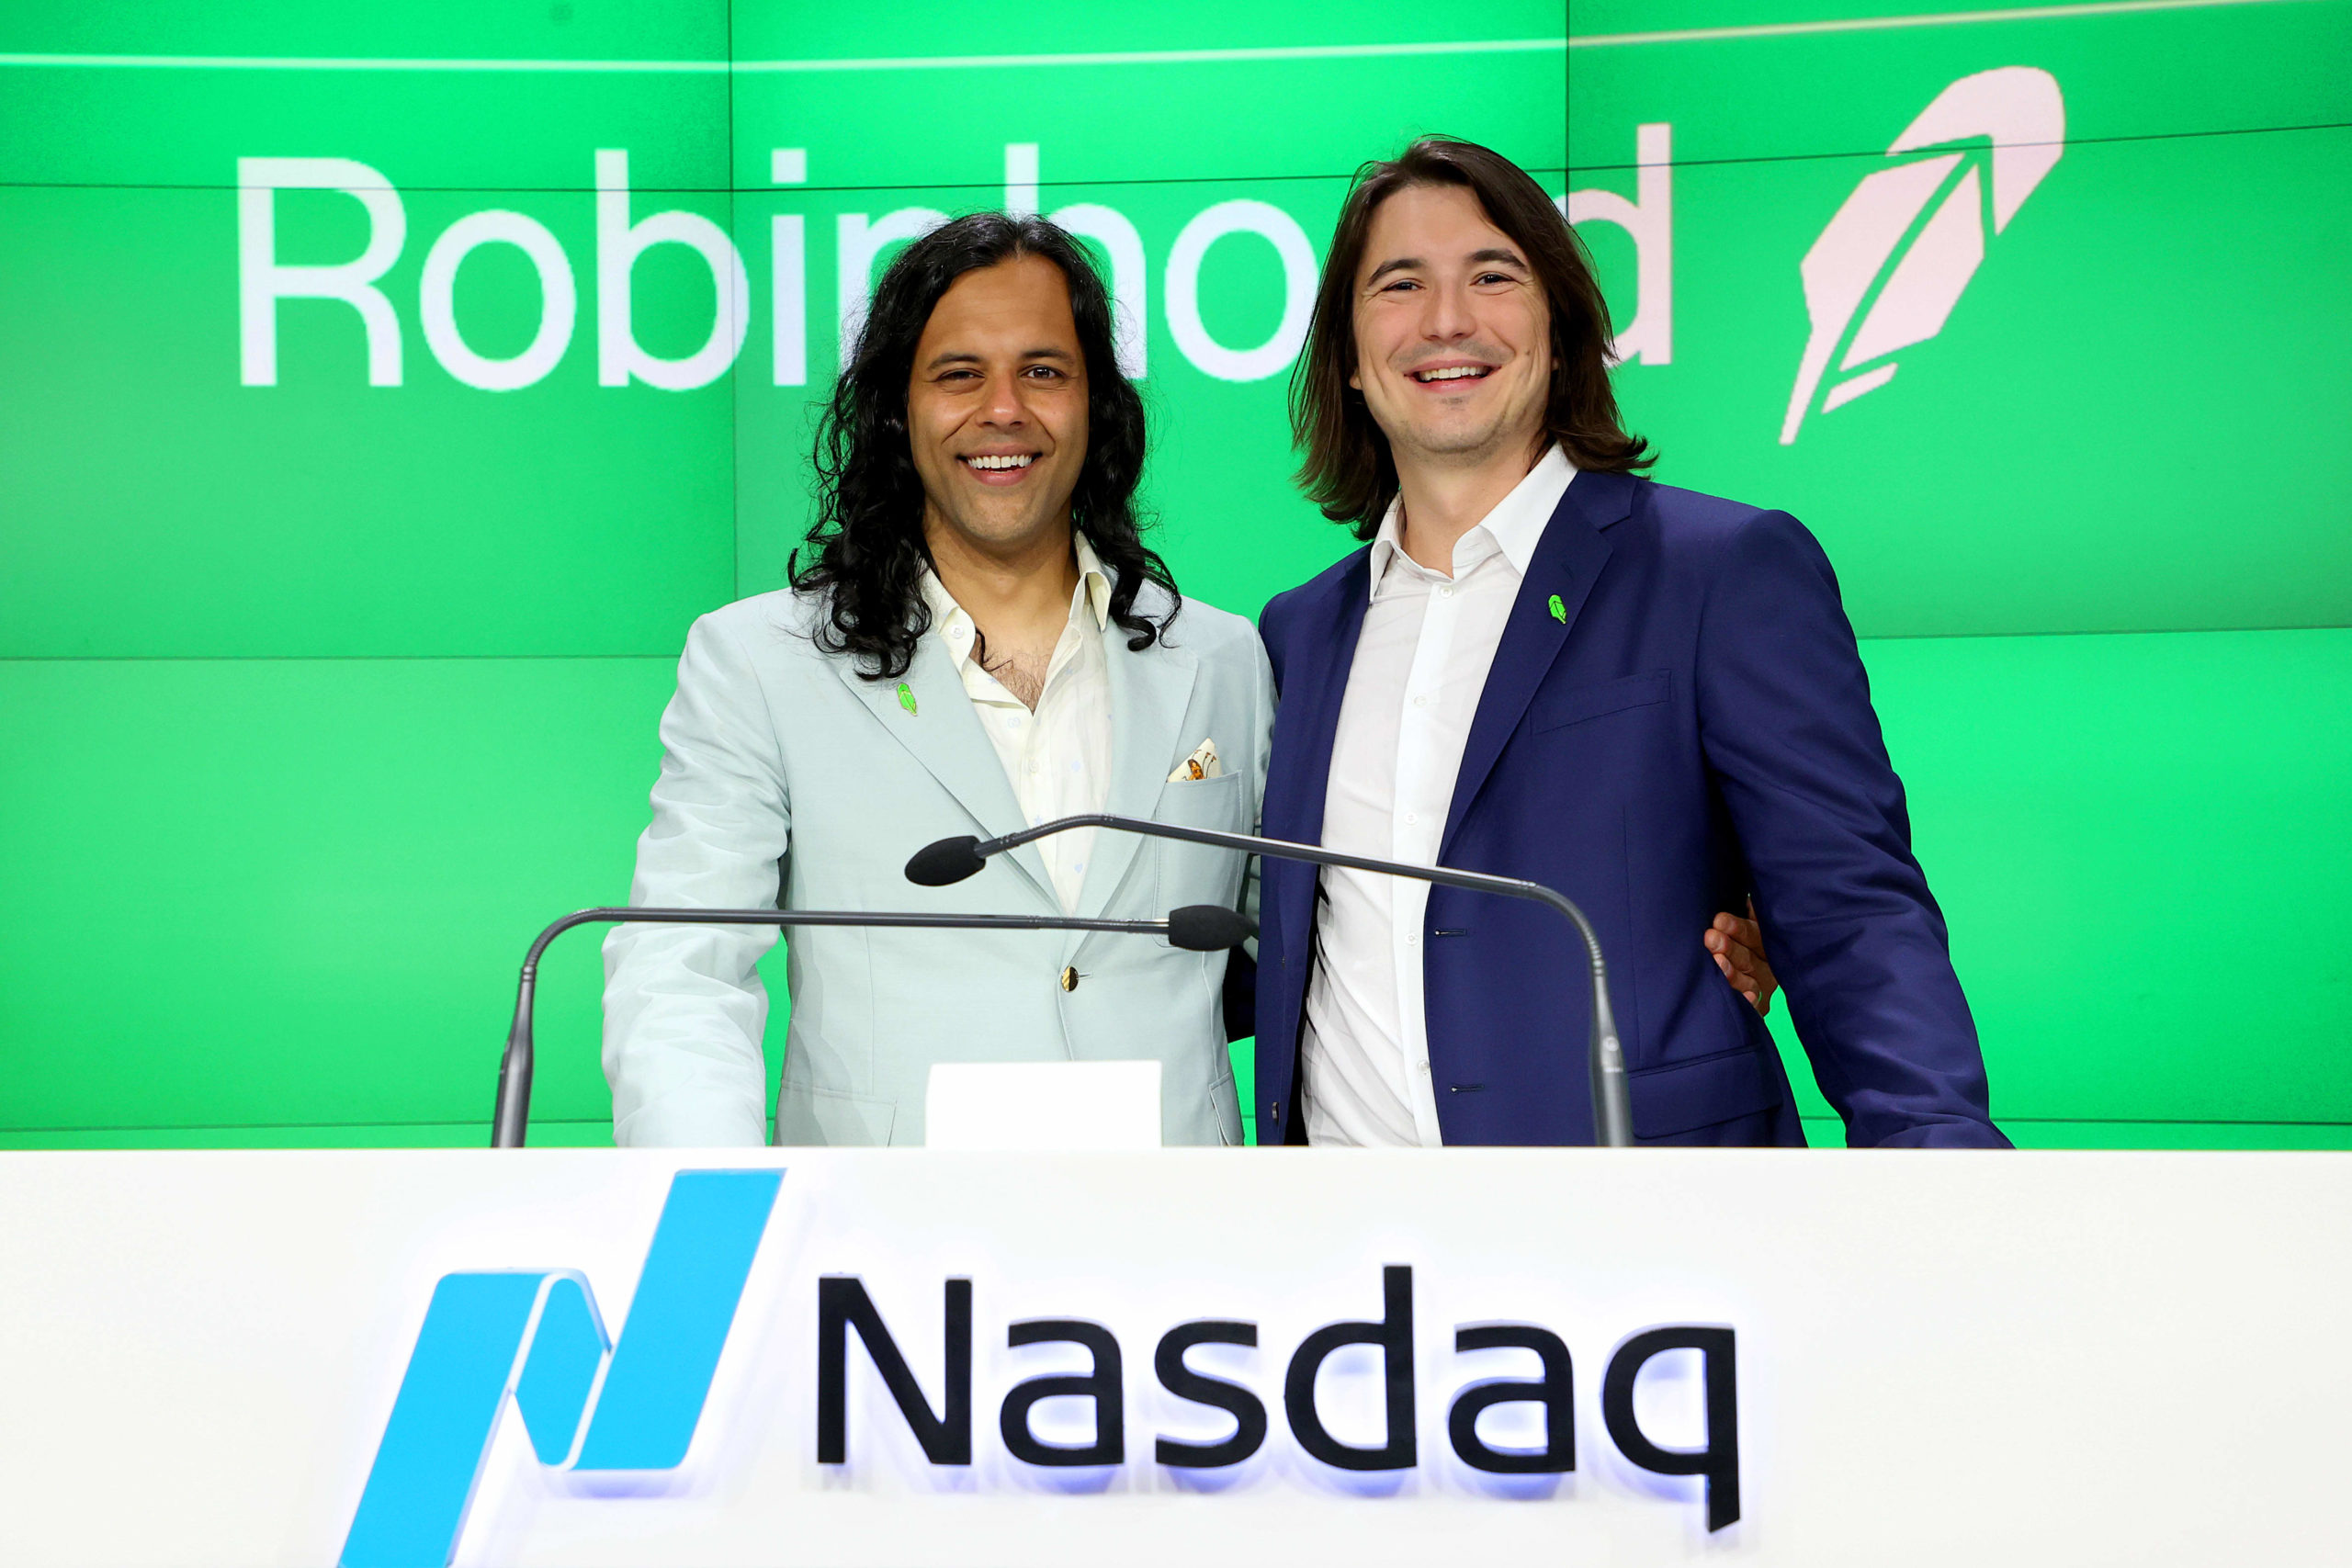 Robinhood shares rebound after falling as much as 14%